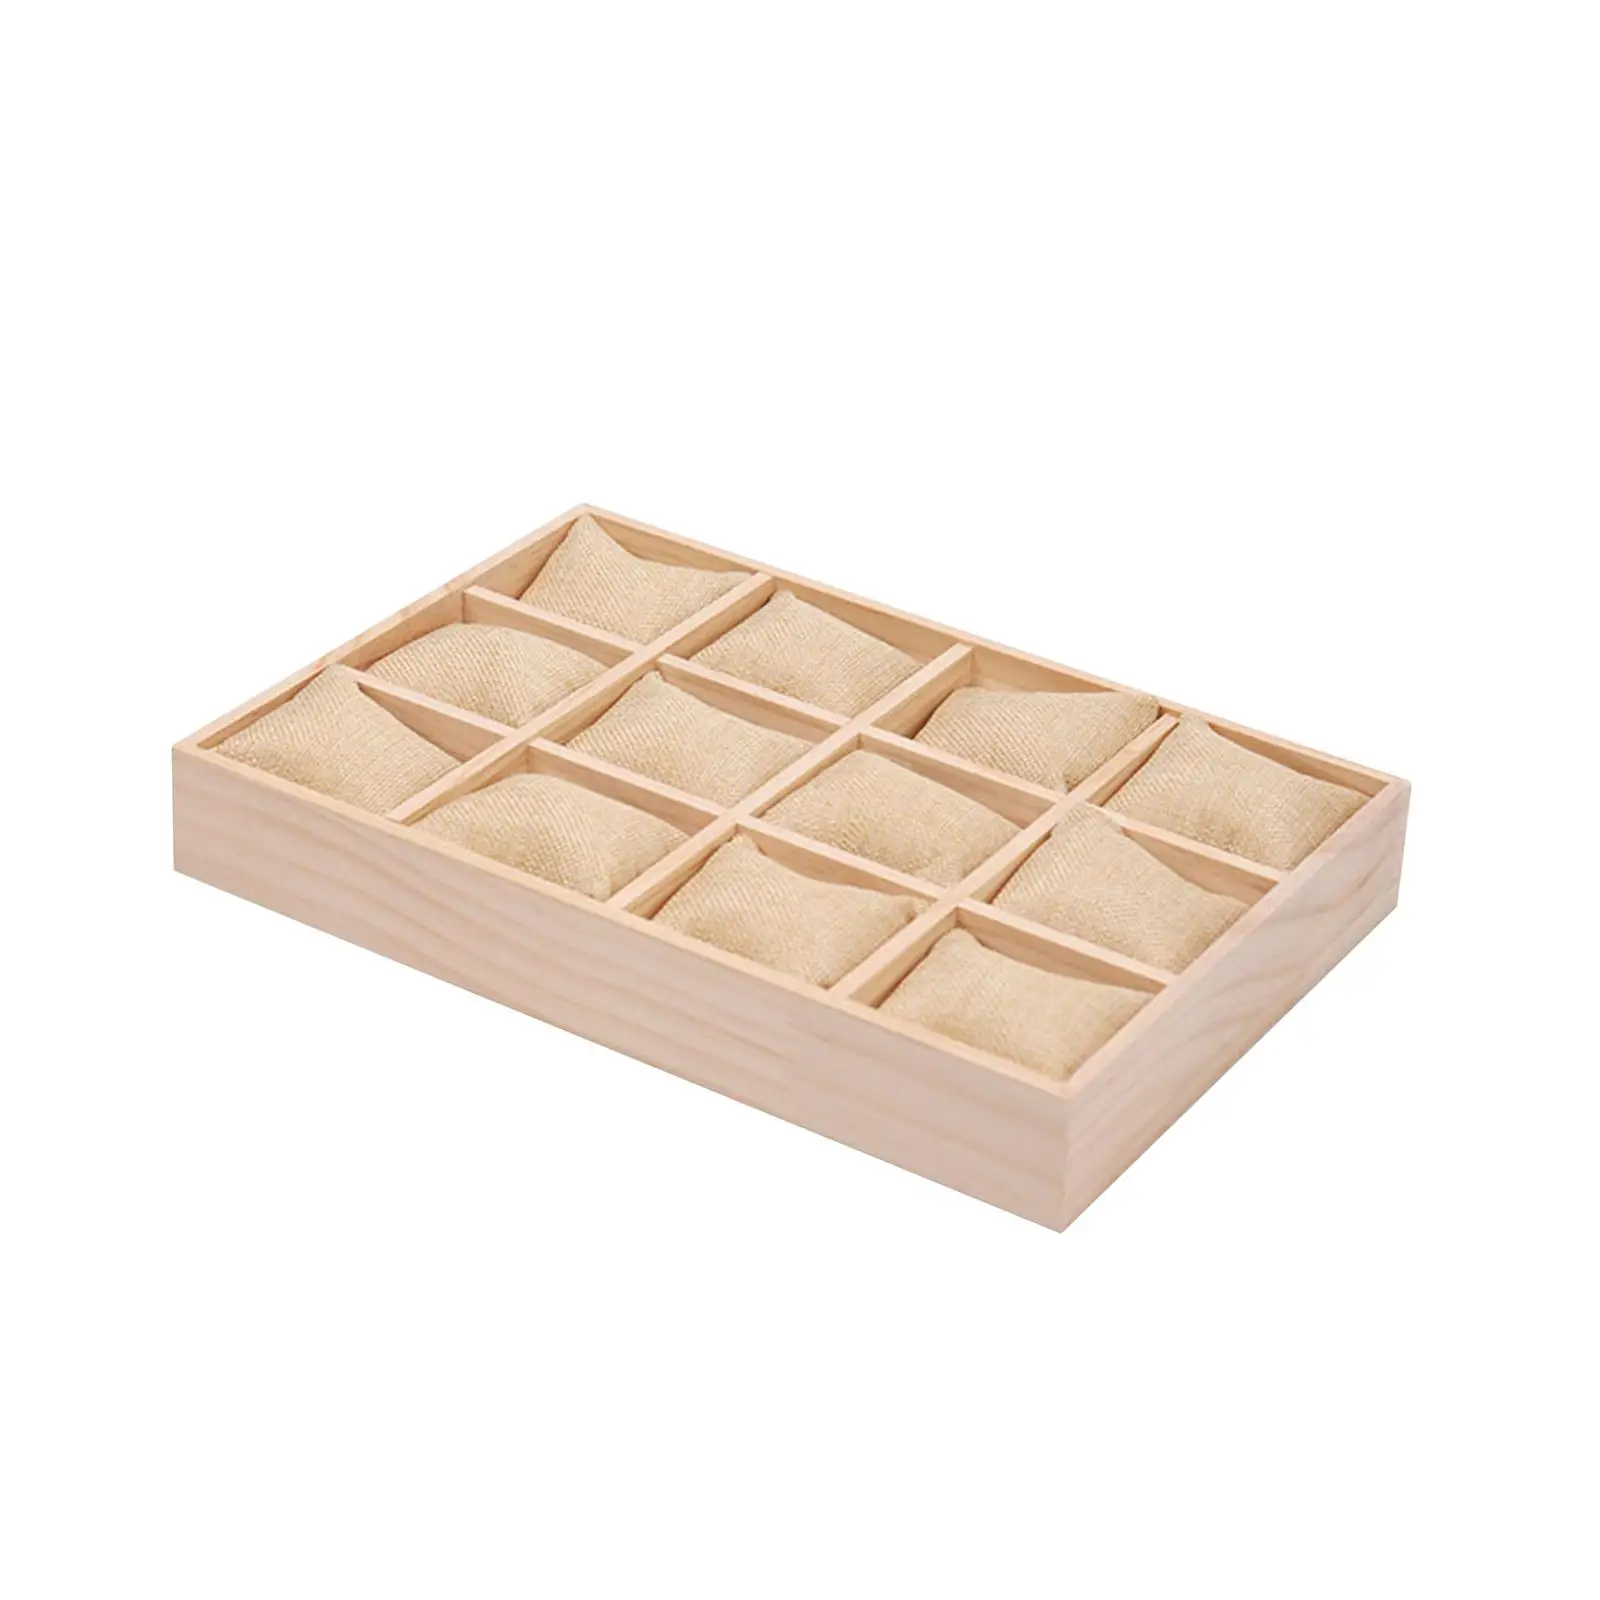 Watch Organizer Tray Wooden Jewelry Bracelet Storage Case 12 Grids Watch Pillows Tray for Dresser Counter Drawer Gifts Shop